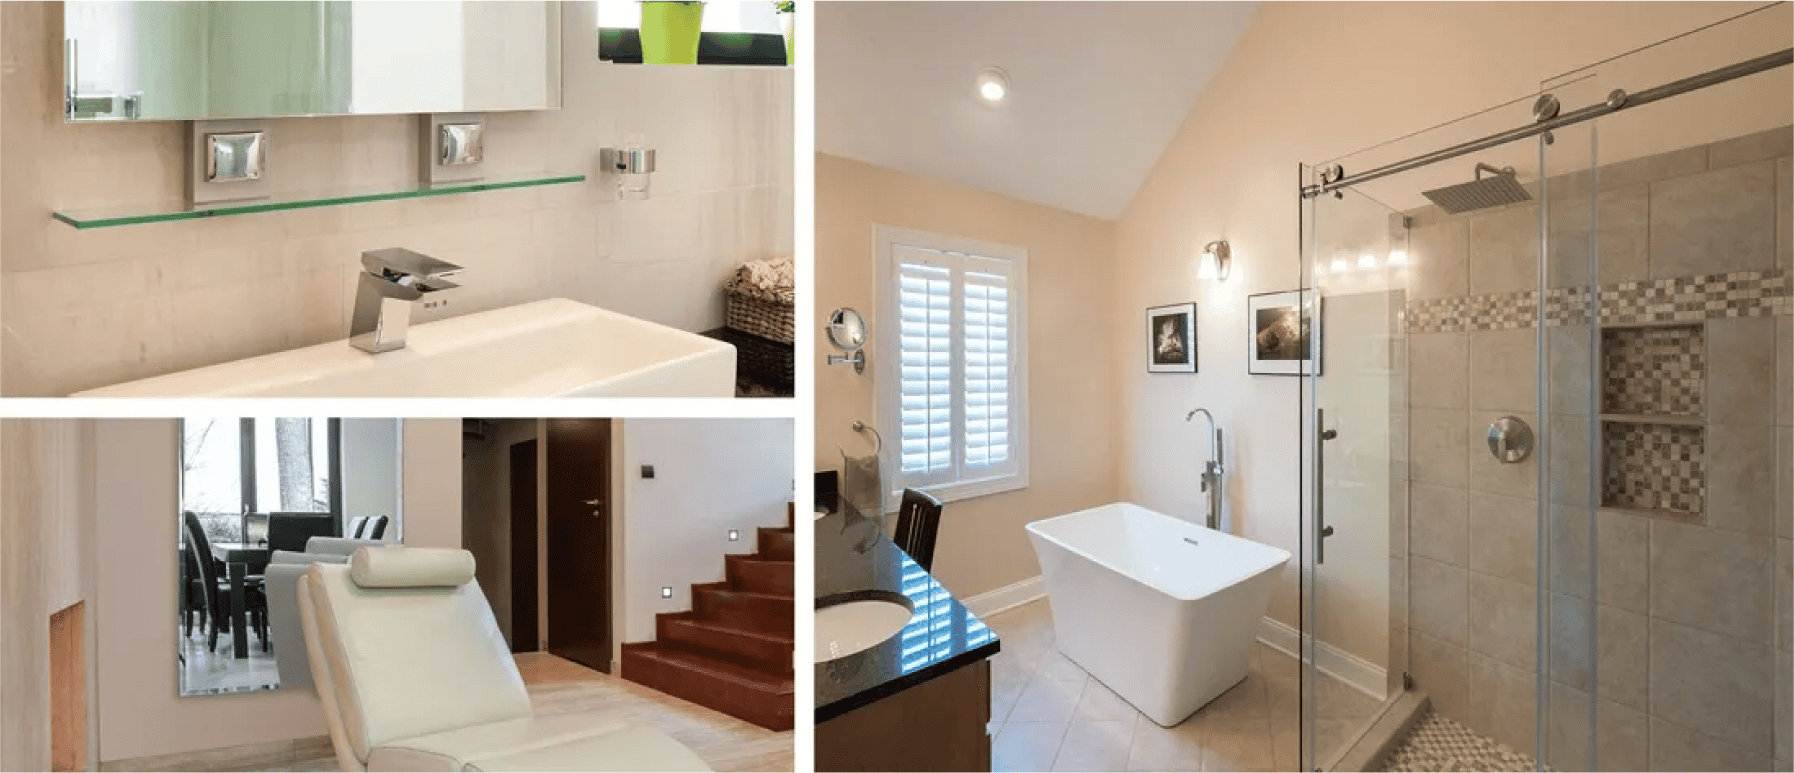 A collage of bathroom, shower, and bathtub pictures showcasing glas, mirror, and shower door ideas for hotels.